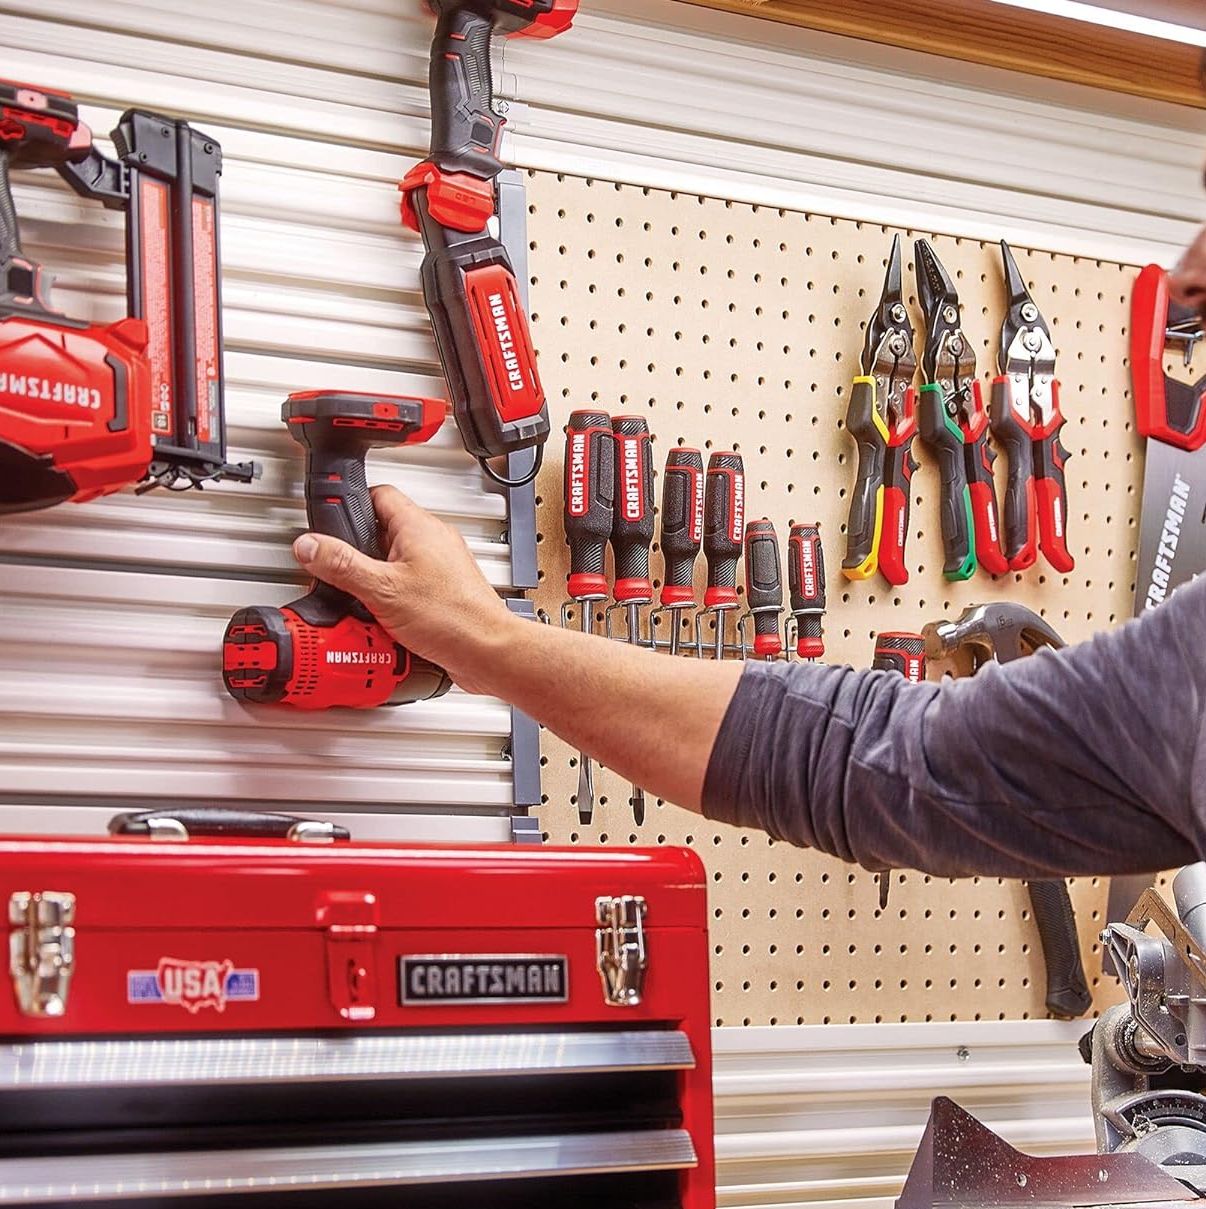 Get Up to 50% Off Craftsman Tools Right Now Through Amazon Warehouse